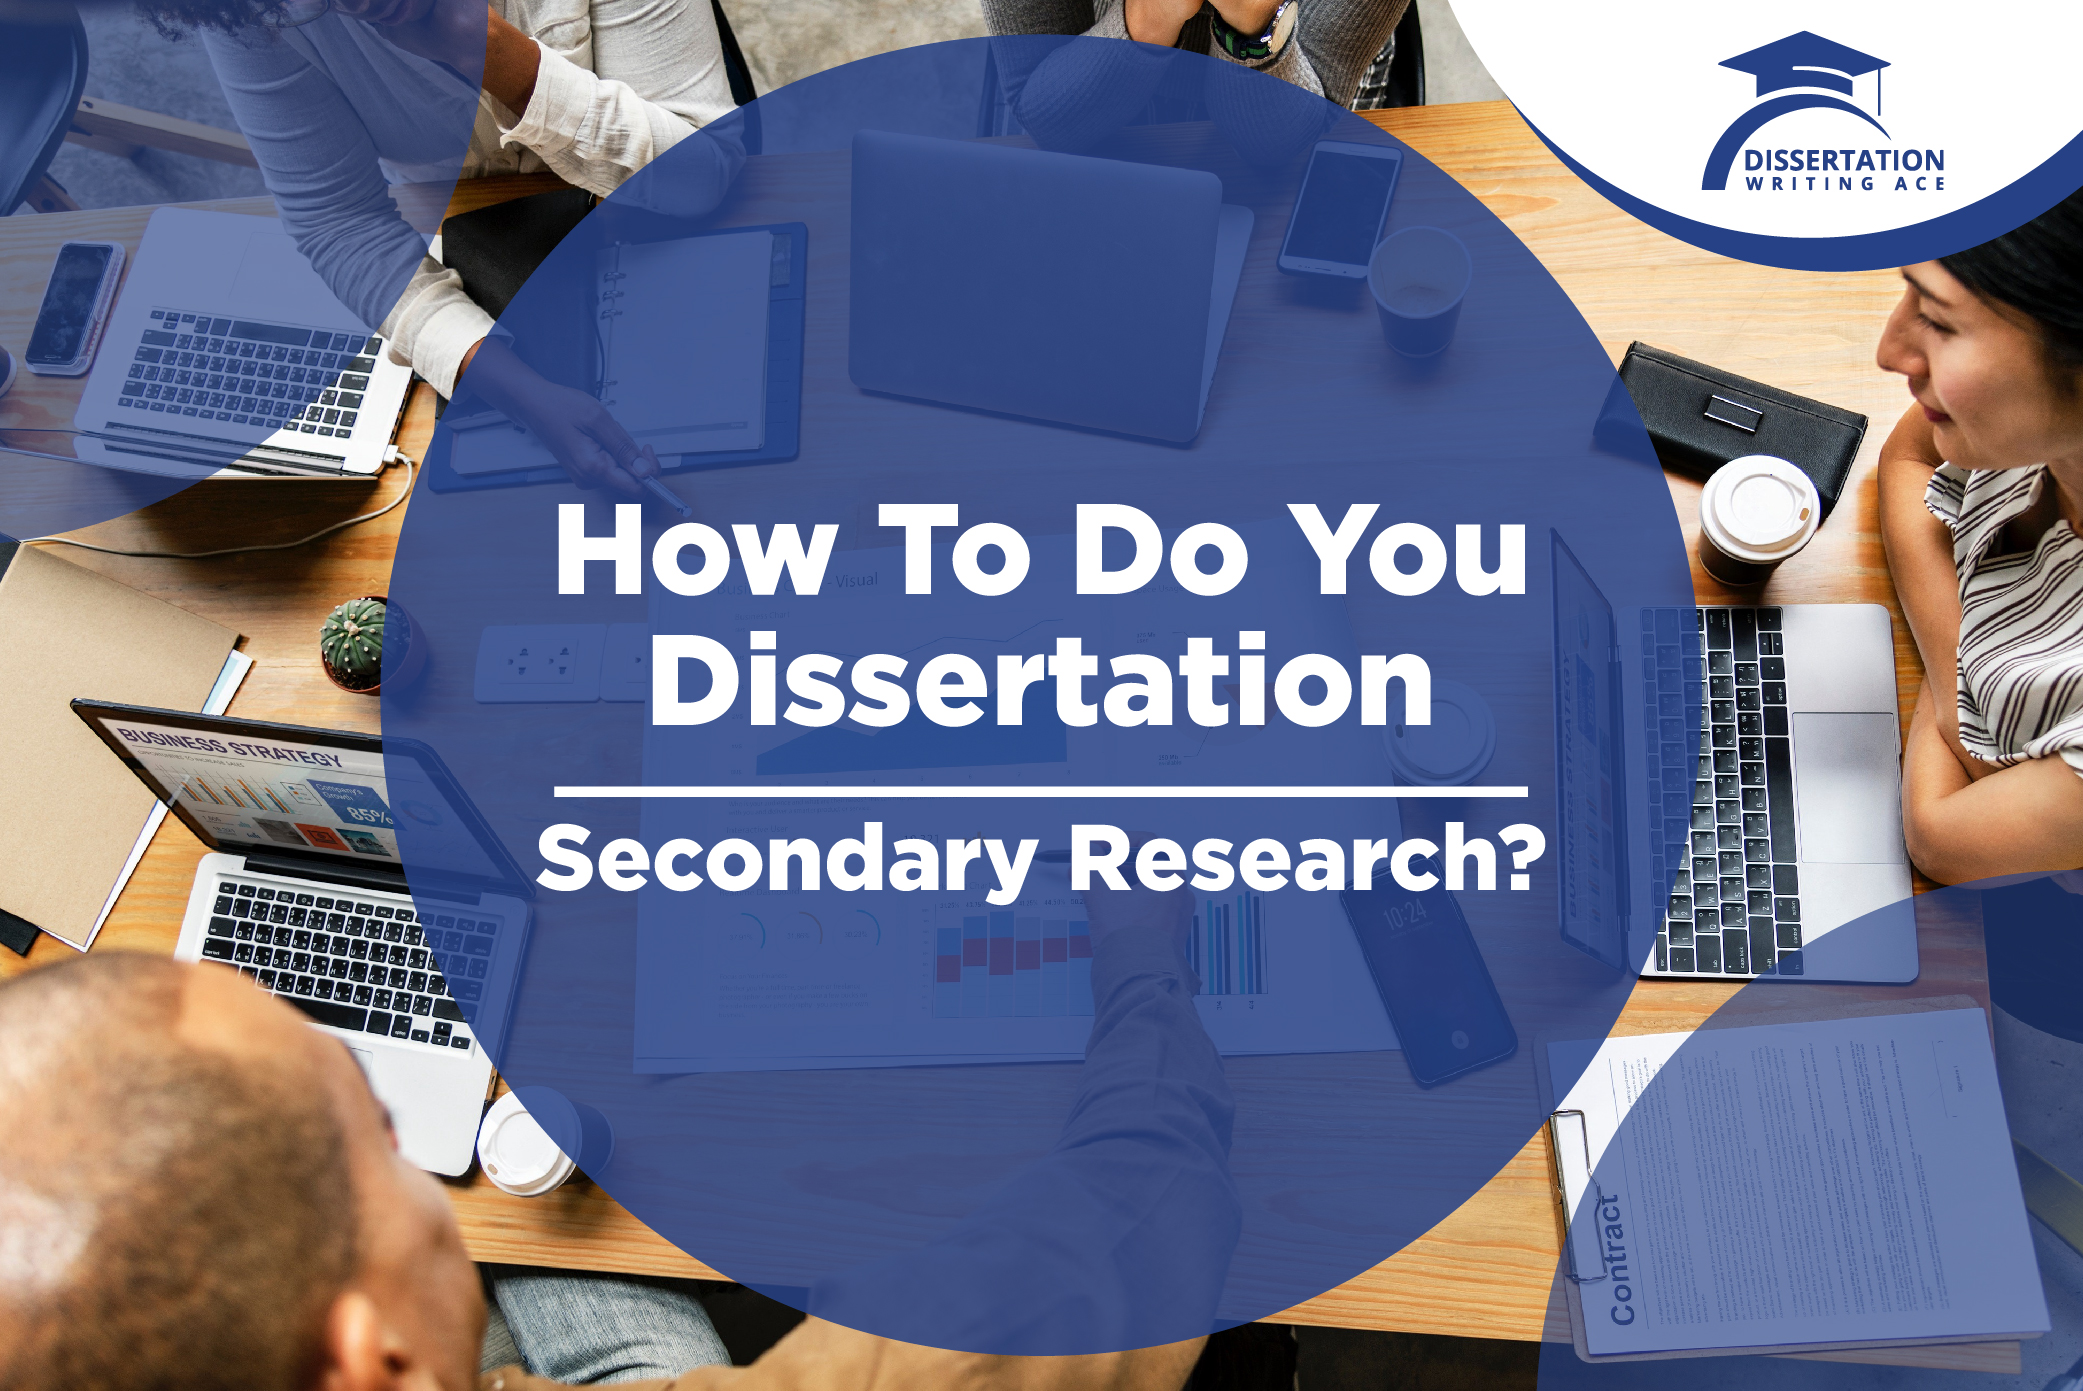 what is secondary research in dissertation